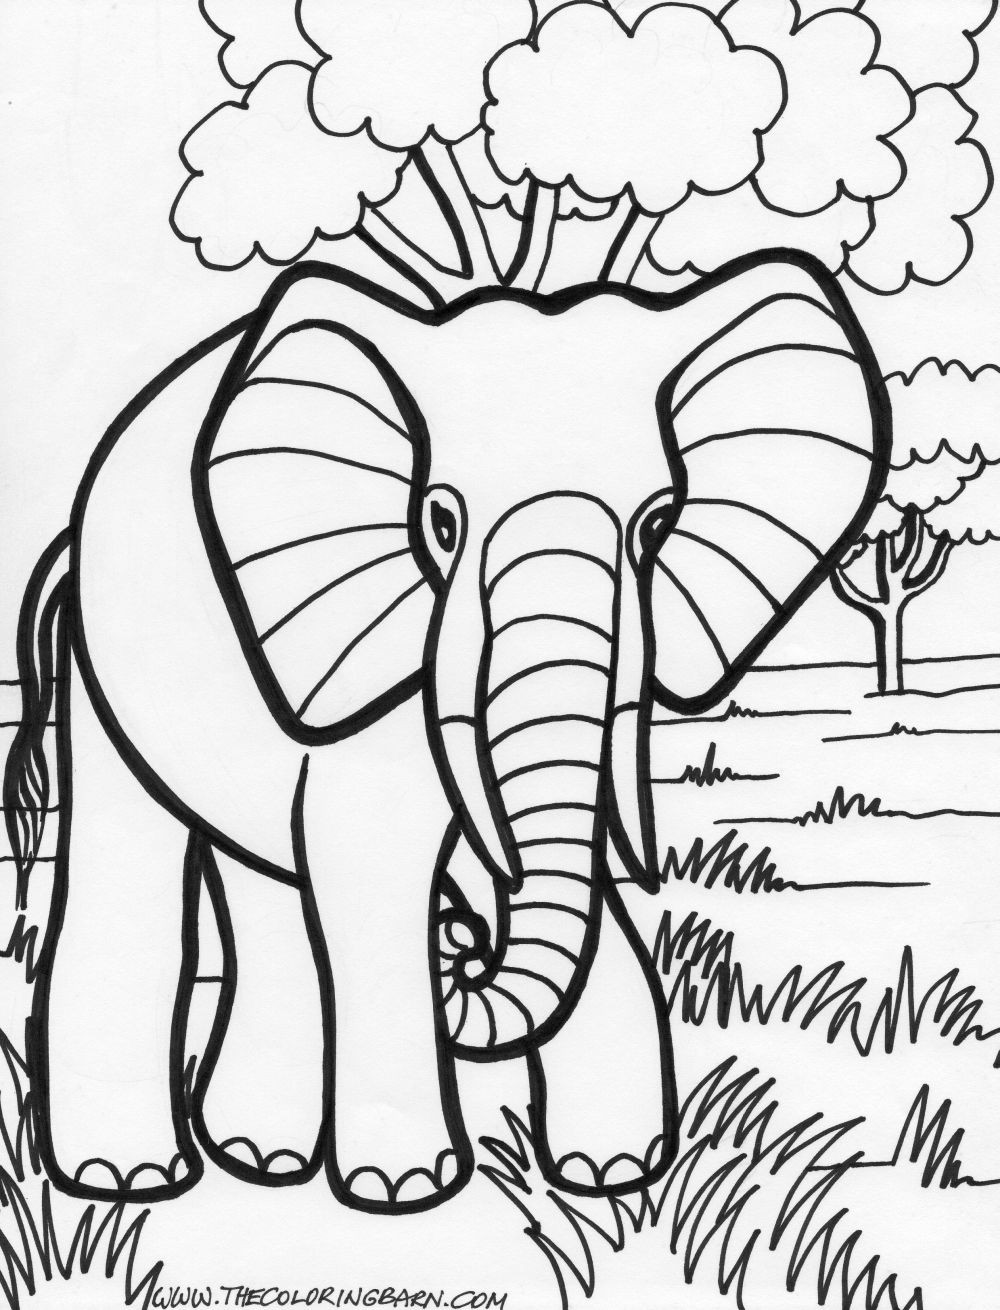 Elephant Coloring Book For Kids
 Black beauty 18 Elephant coloring pages